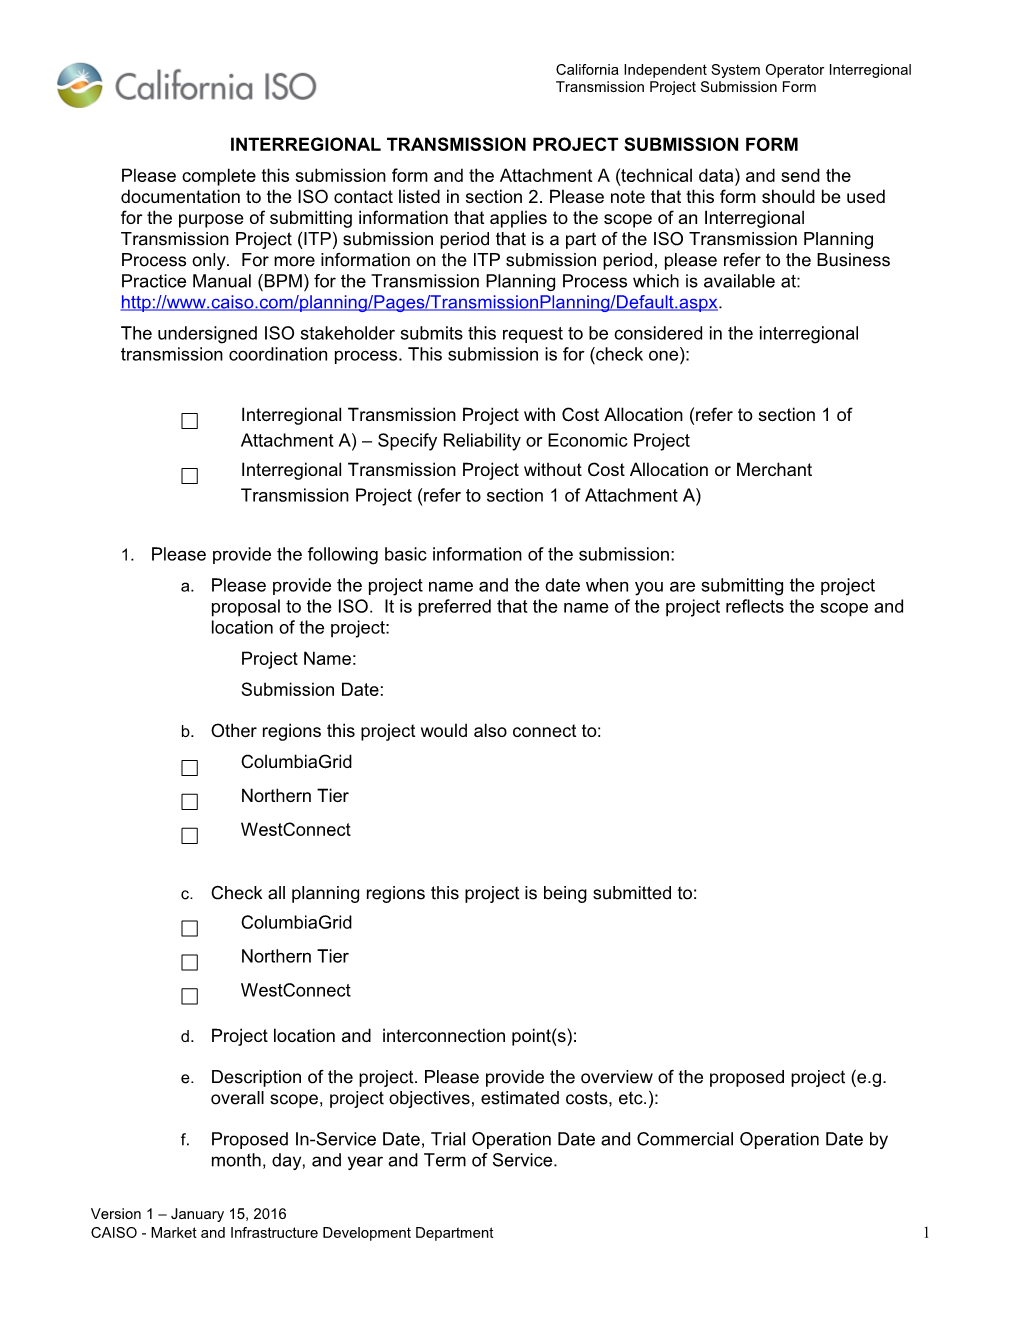 Interregional Transmission Project Submission Form